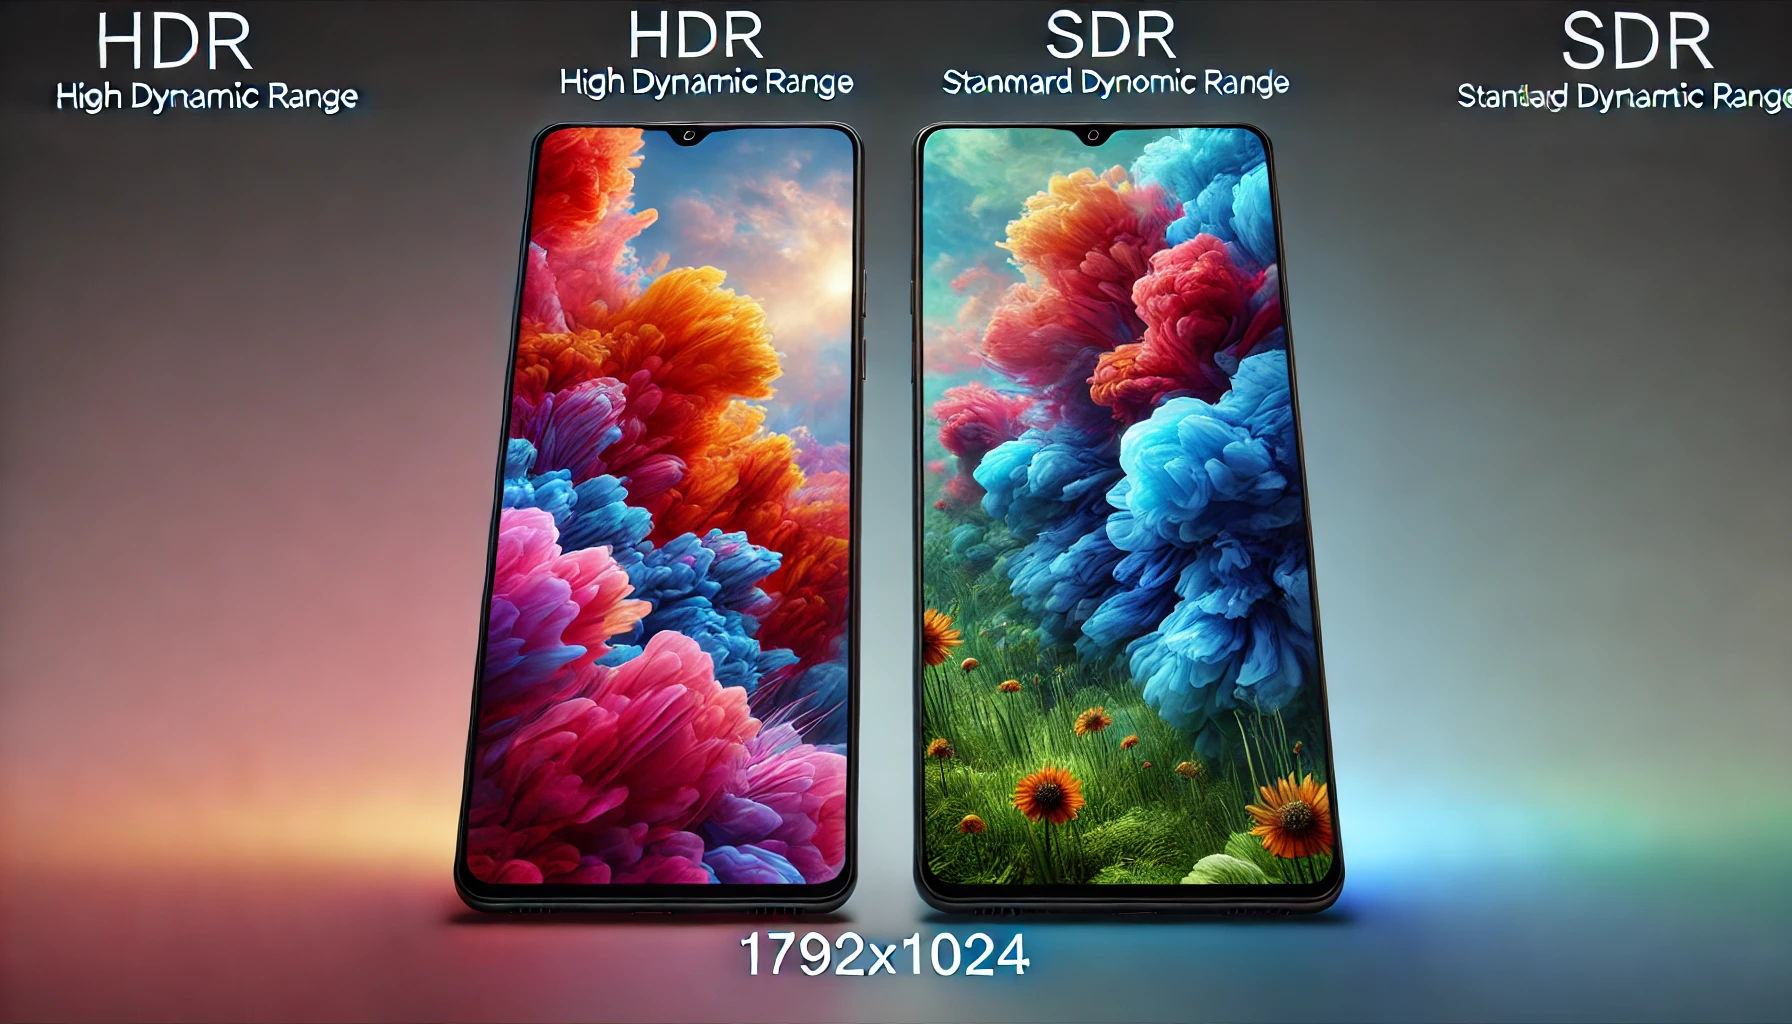 HDR vs SDR: The Battle of High Dynamic Range Display on Mobile Devices